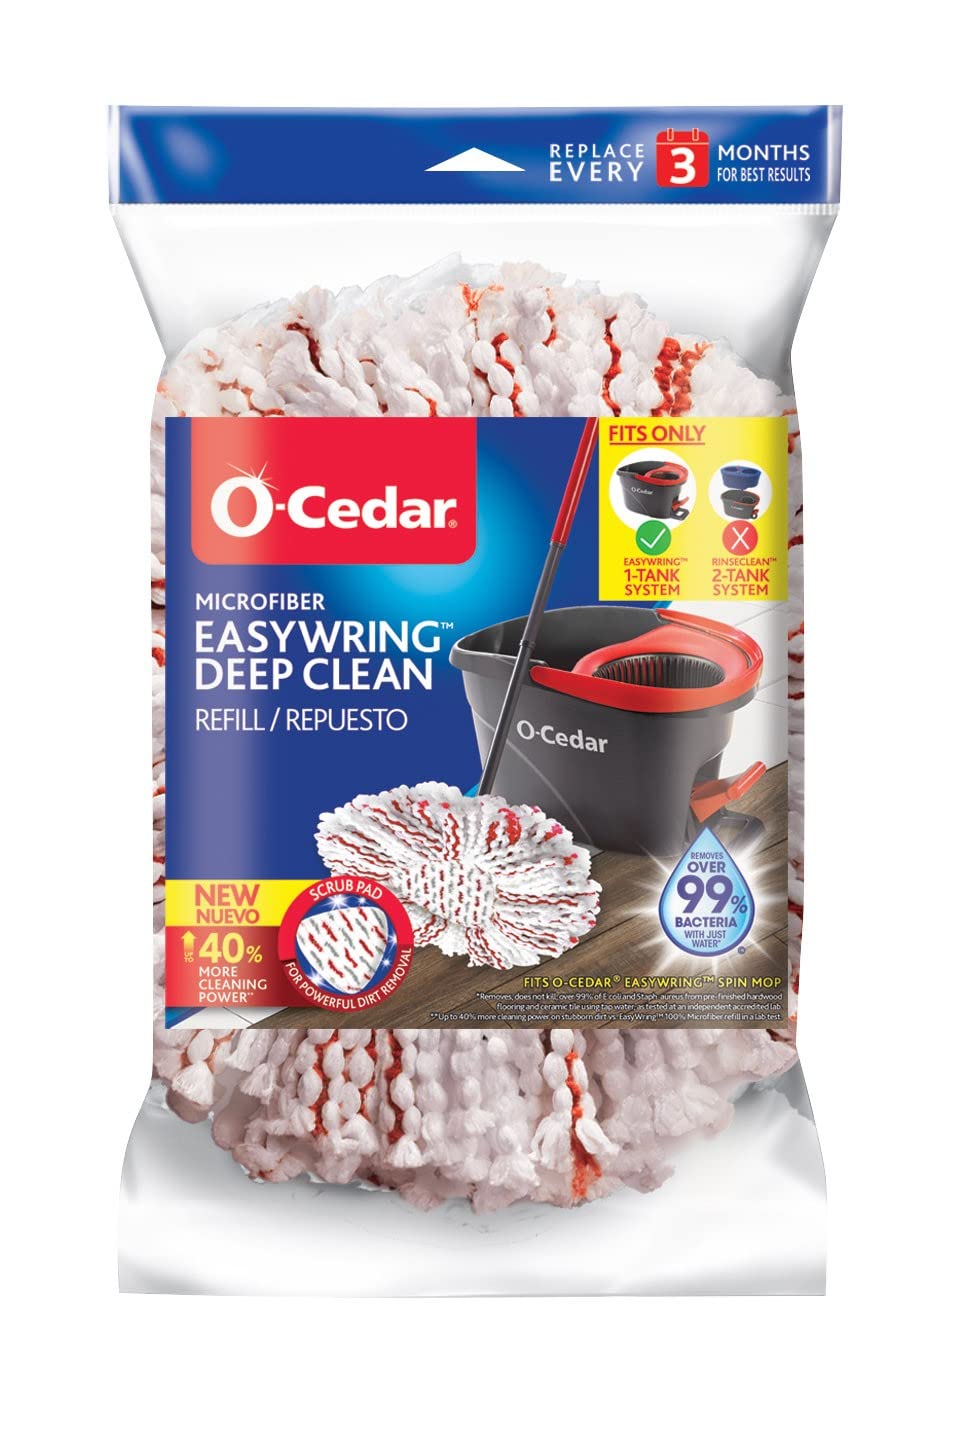 O-Cedar EasyWring Deep Clean Refill (1-Pack) | 40% More Cleaning Power | Microfiber Mop Refill Compatible with O-Cedar EasyWring Spin Mop & Bucket System